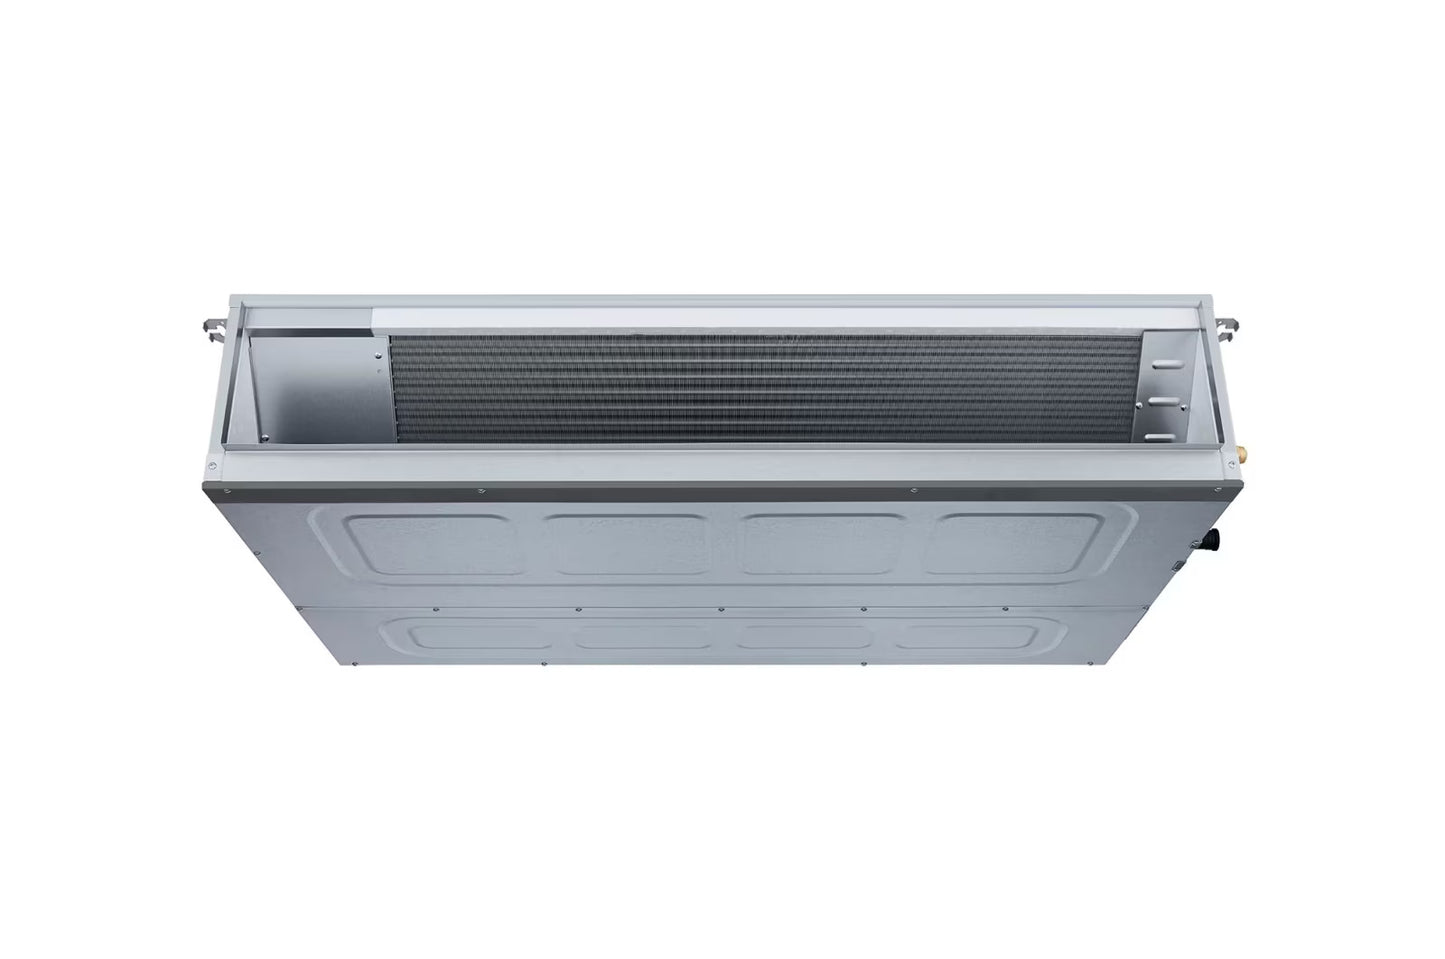 LG Ceiling Concealed Duct INV Unit 2.8KW with High Static and E.S.P. Control for Multiple Rooms - ARNU09GBHA4